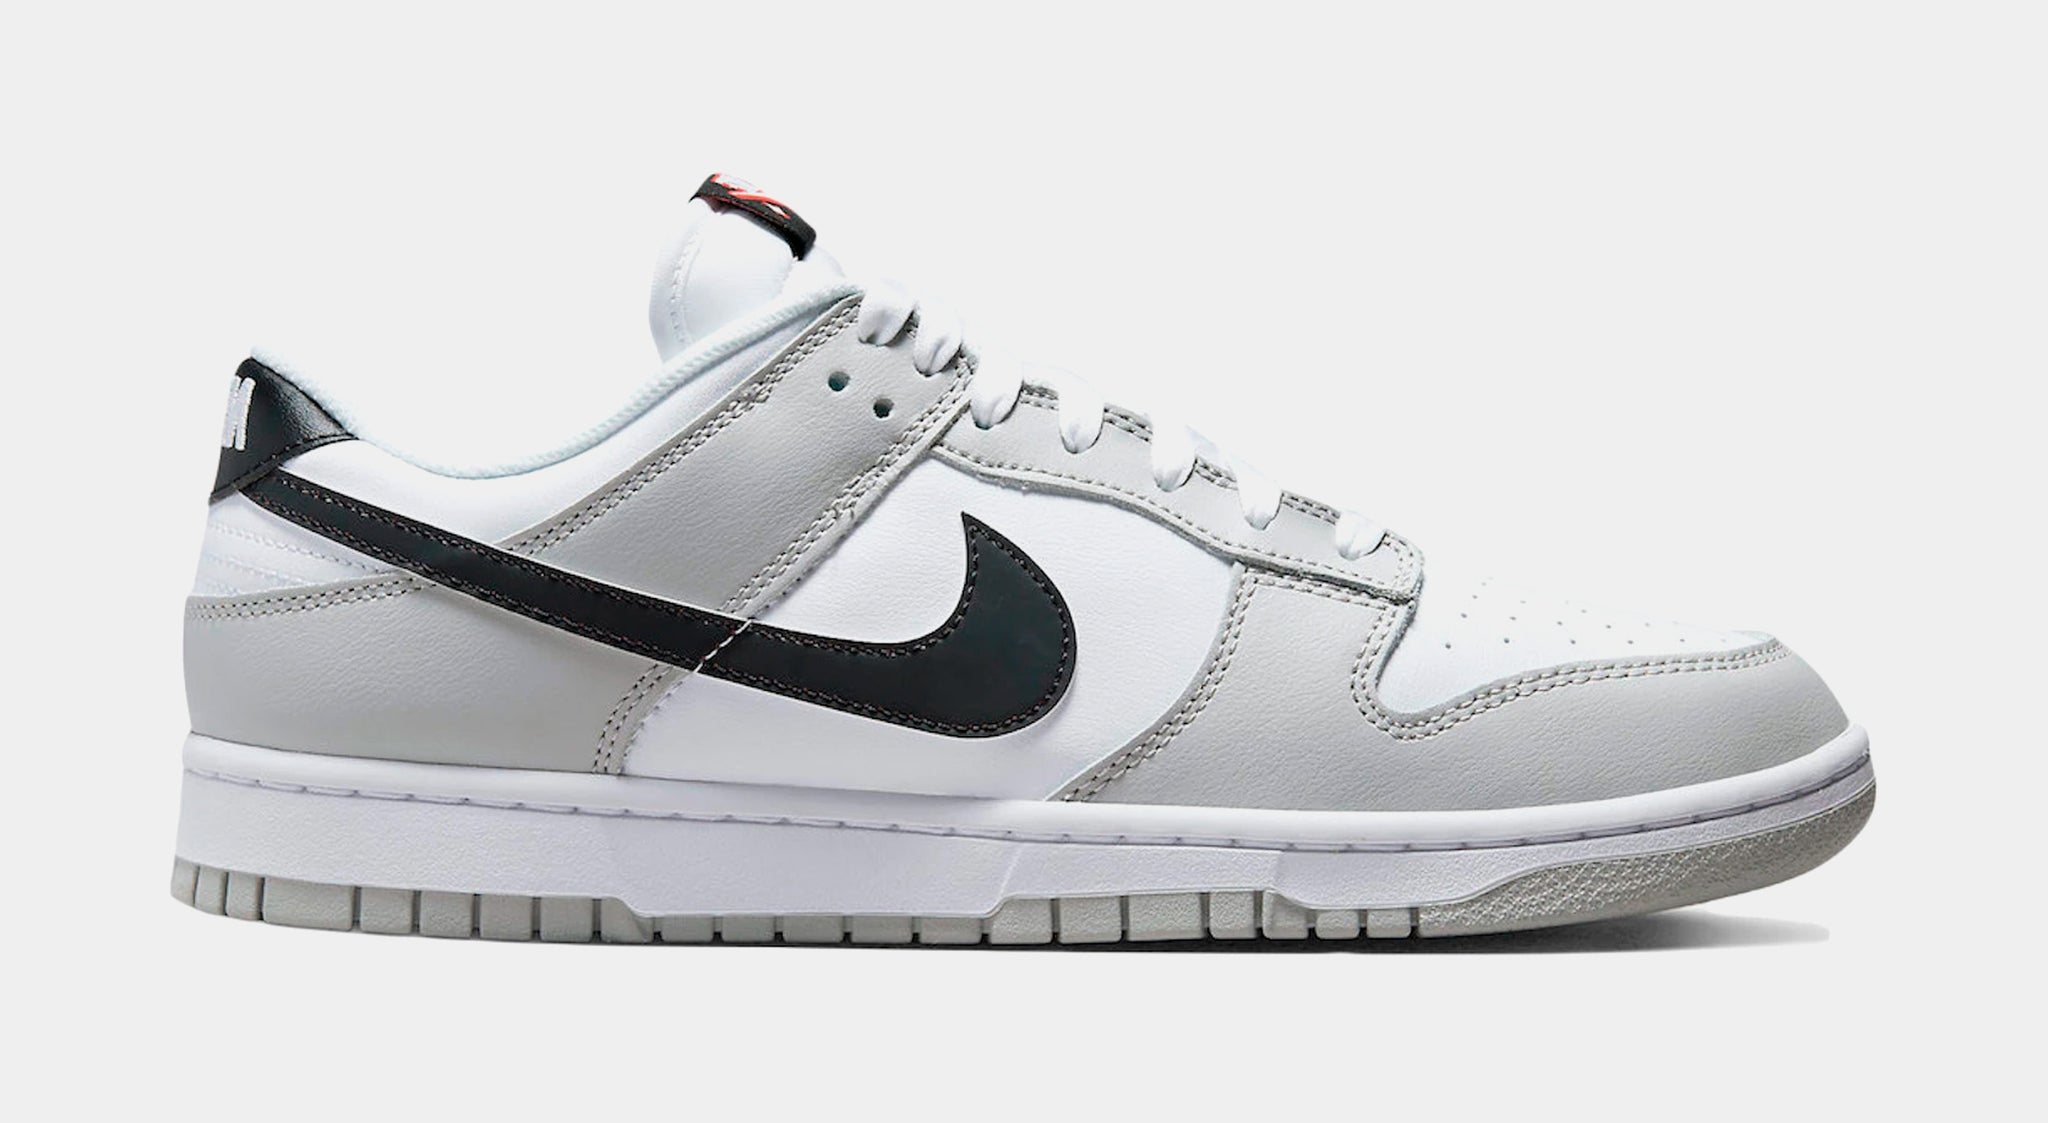 Nike Dunk Low SE Lottery Mens Lifestyle Shoes Grey White Limit One